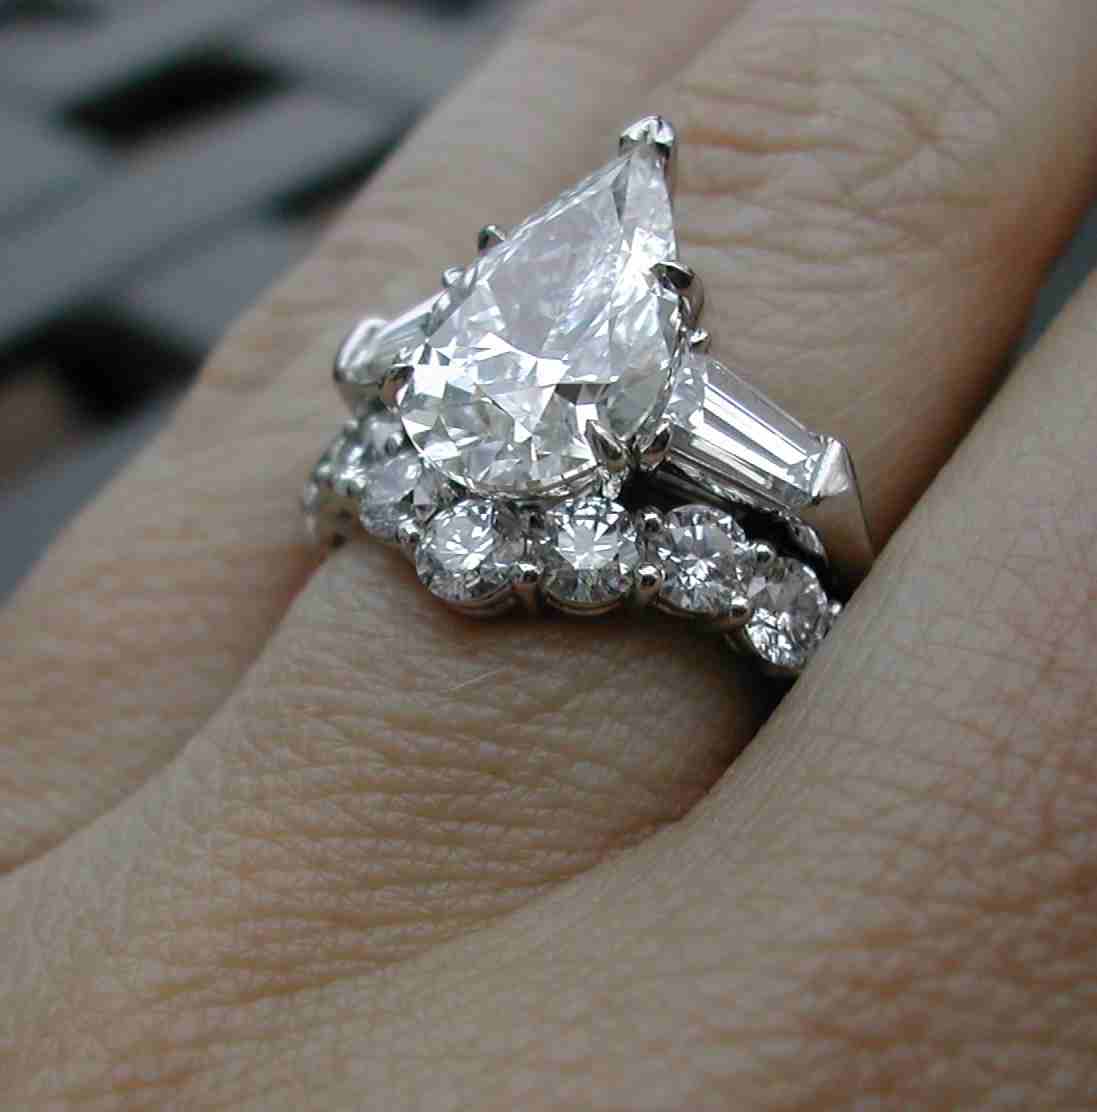 Ring%20pictures%20002%20(2).jpg